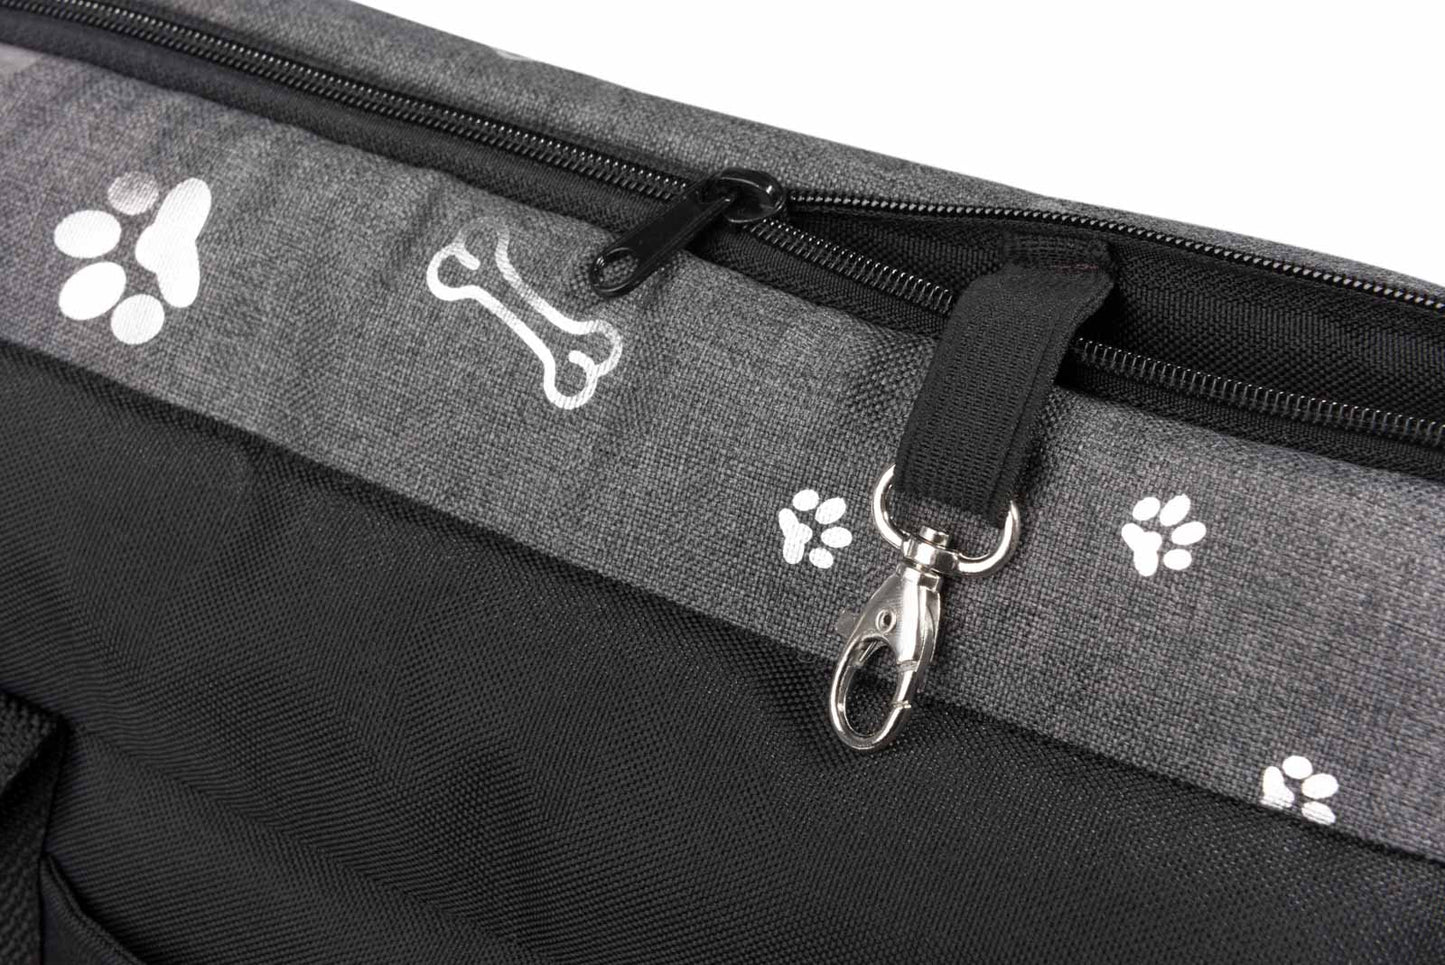 Pet Bag SHINY - Bag for walking dogs and cats. Handmade accessories for dogs.